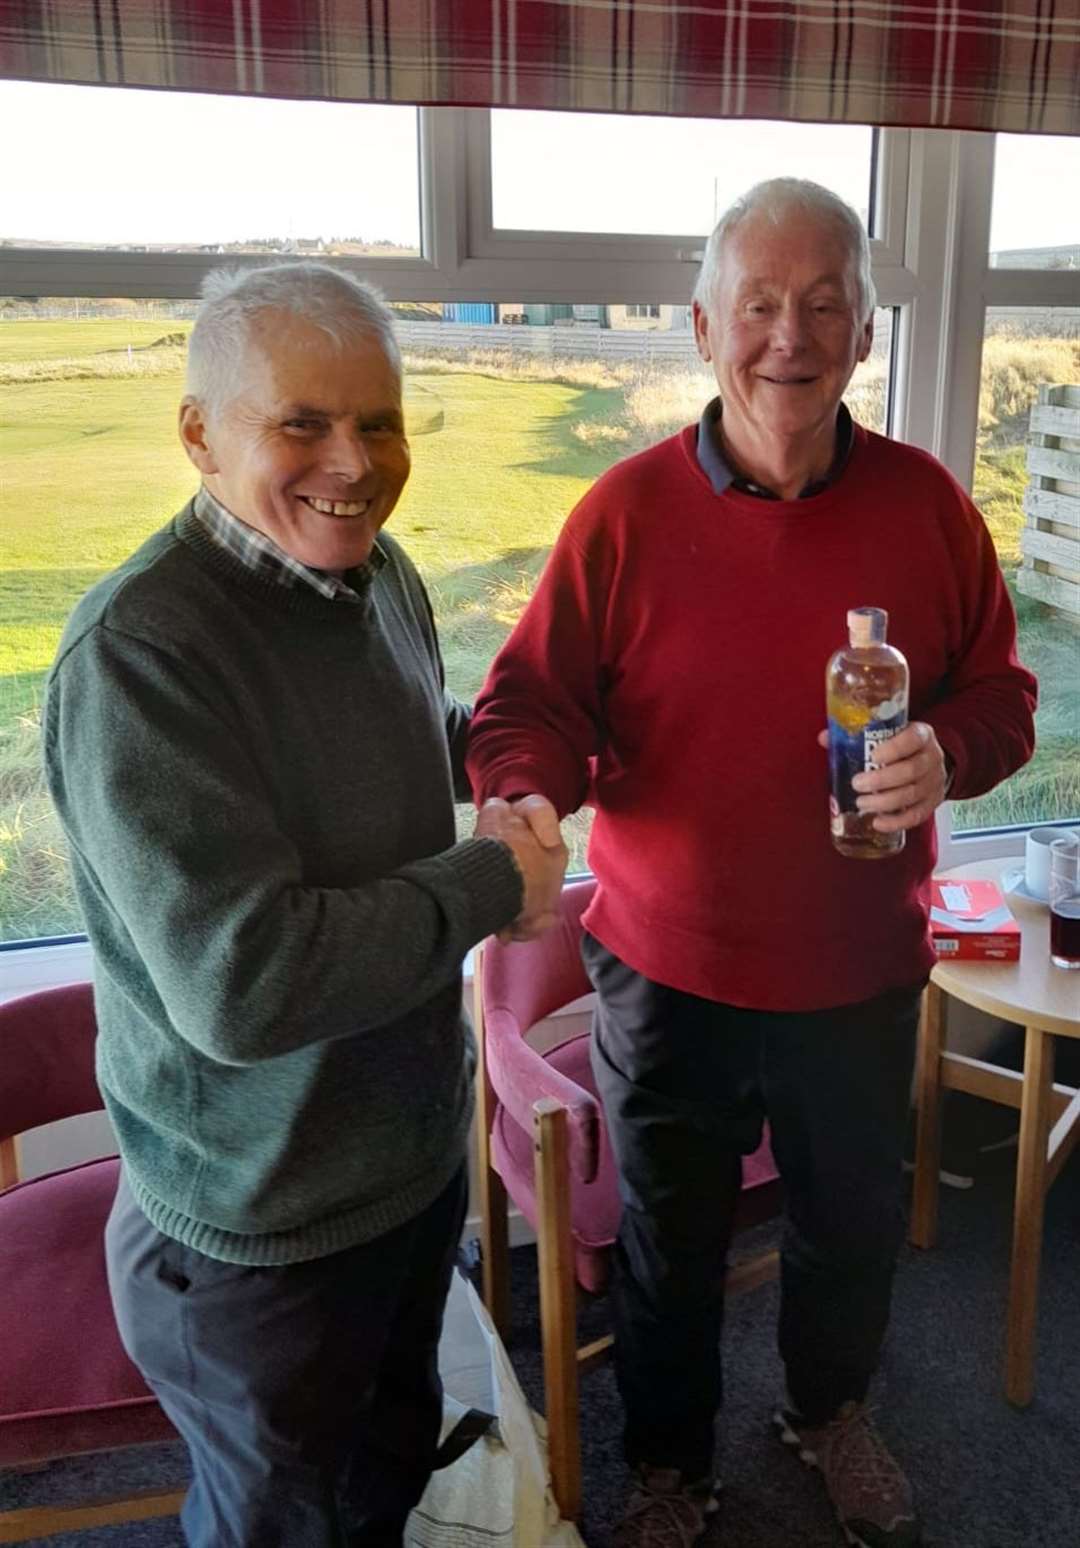 Colin Struthers (right) receives the nearest-the-pin prize, a bottle of North Point rum, from senior convener Sandy Chisholm after the latest round of the seniors' winter Stableford competition at Reay.